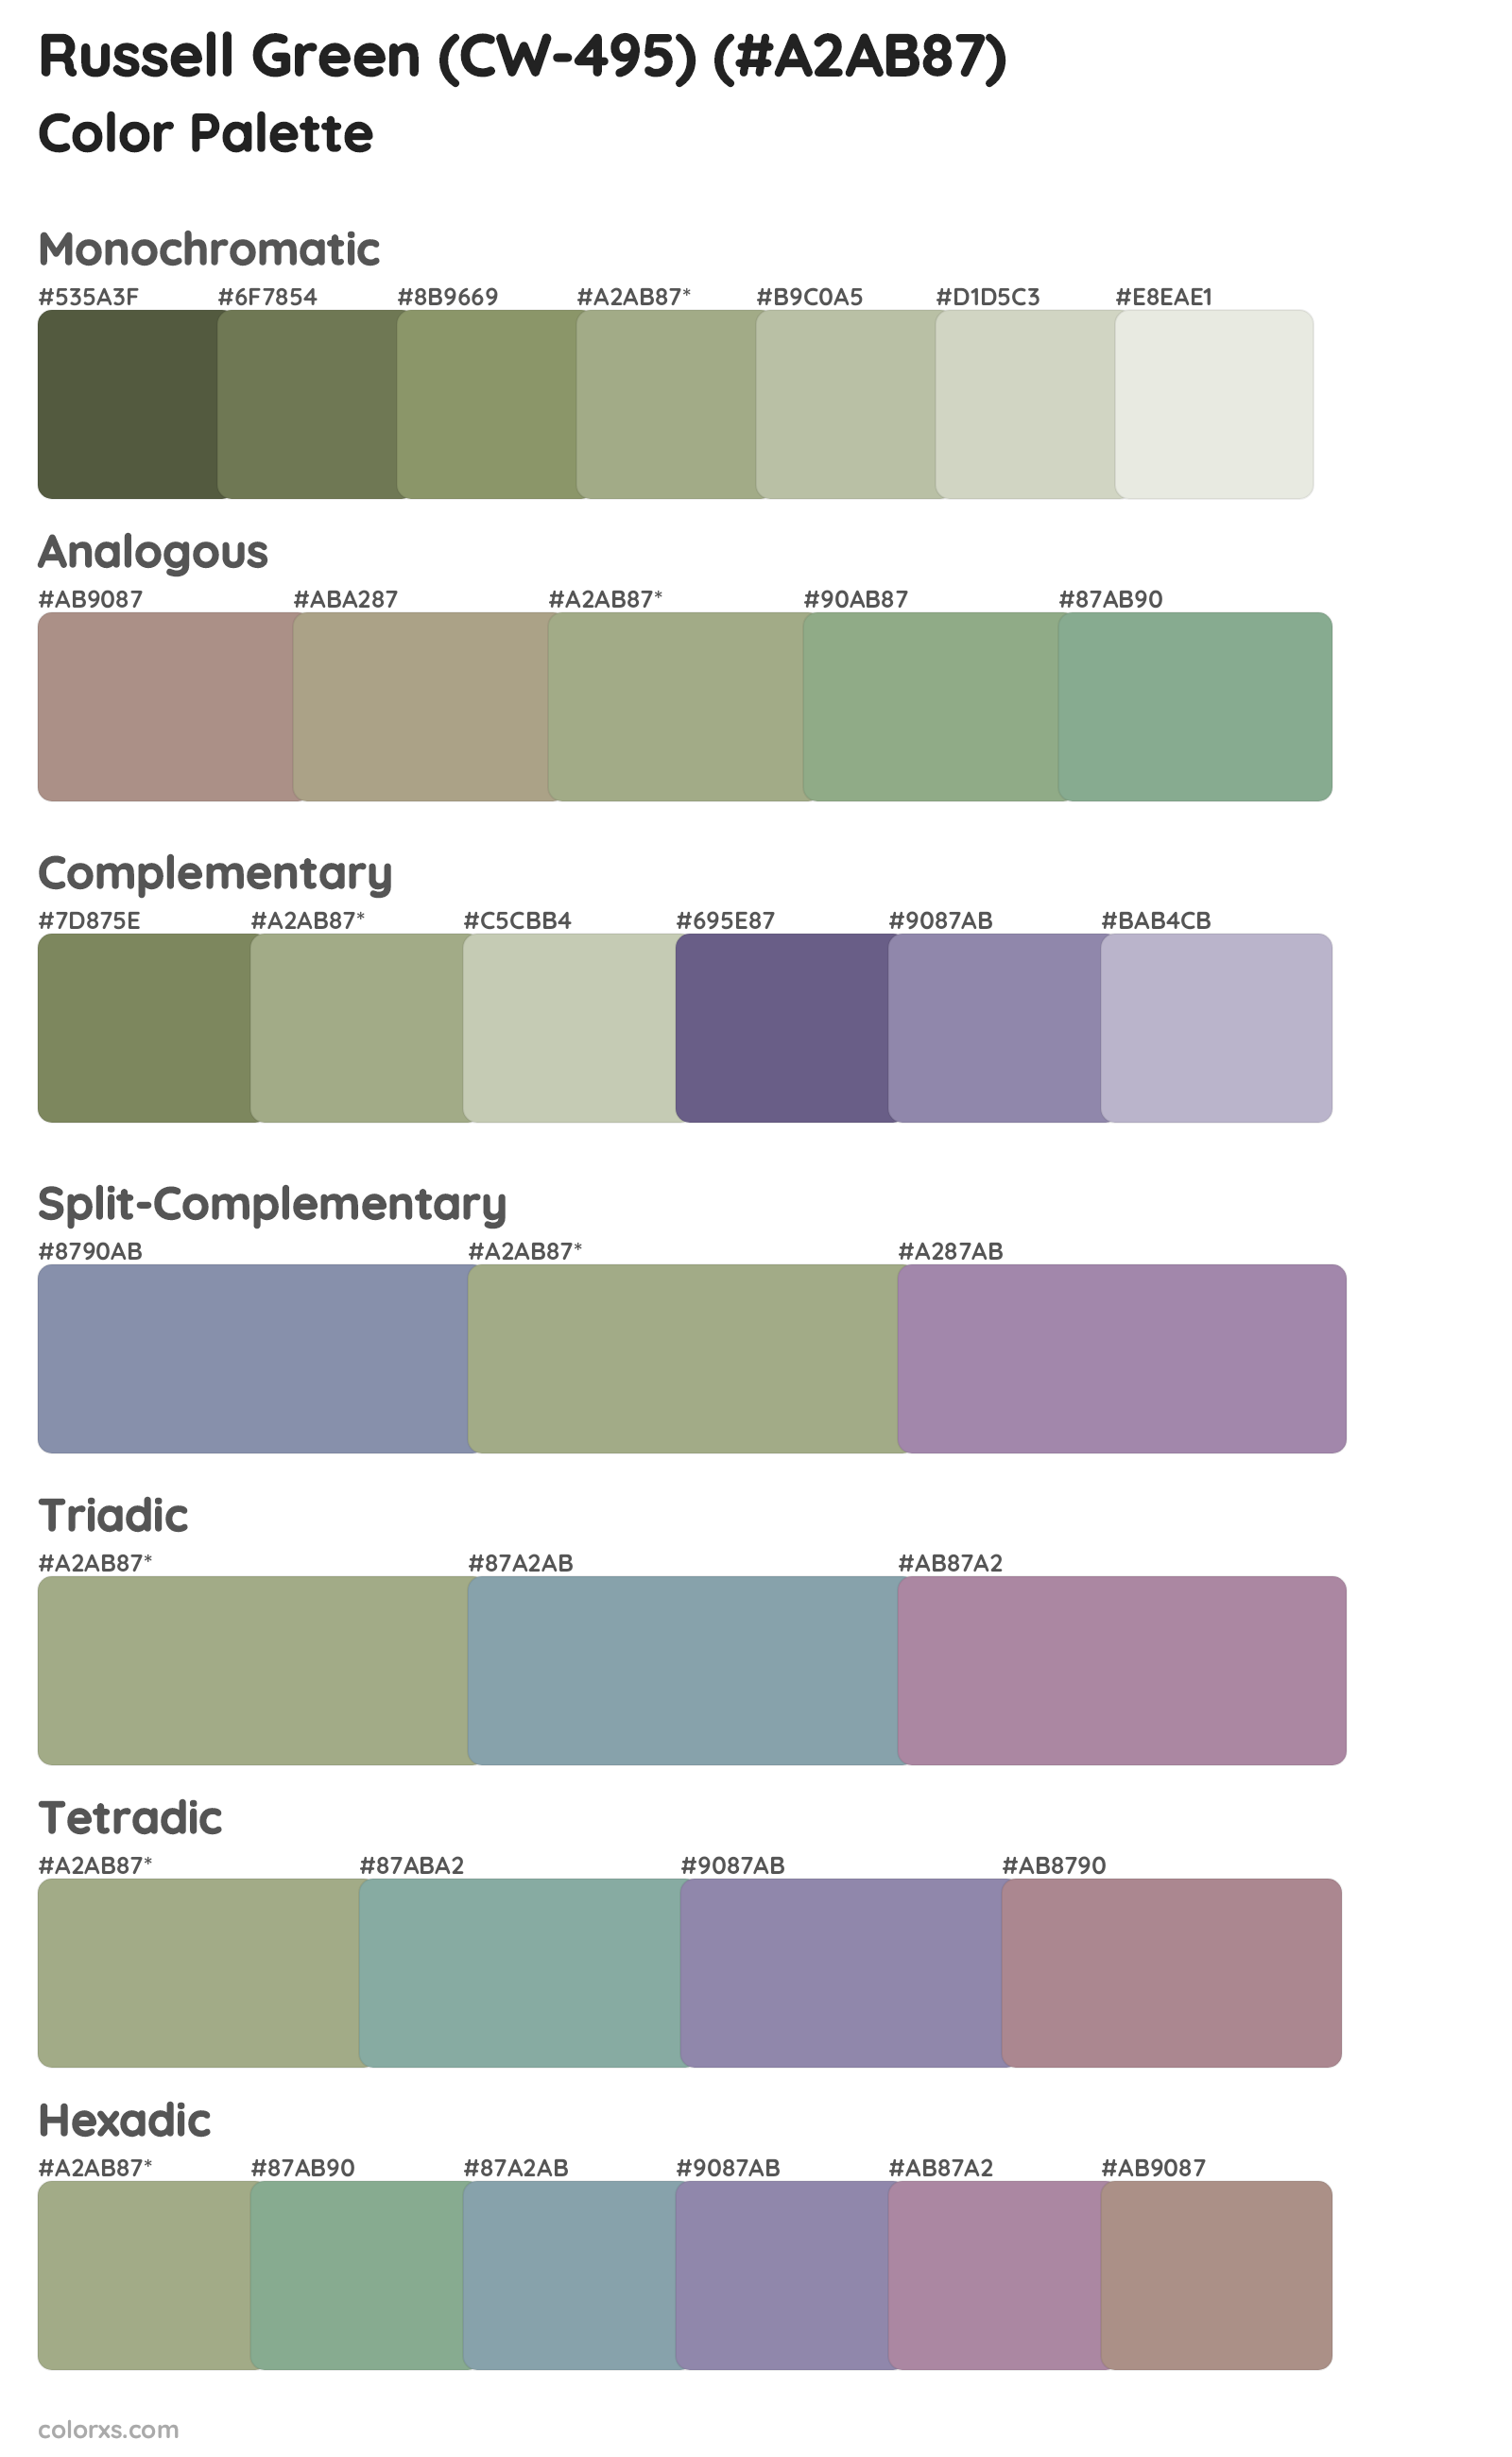 Russell Green (CW-495) Color Scheme Palettes